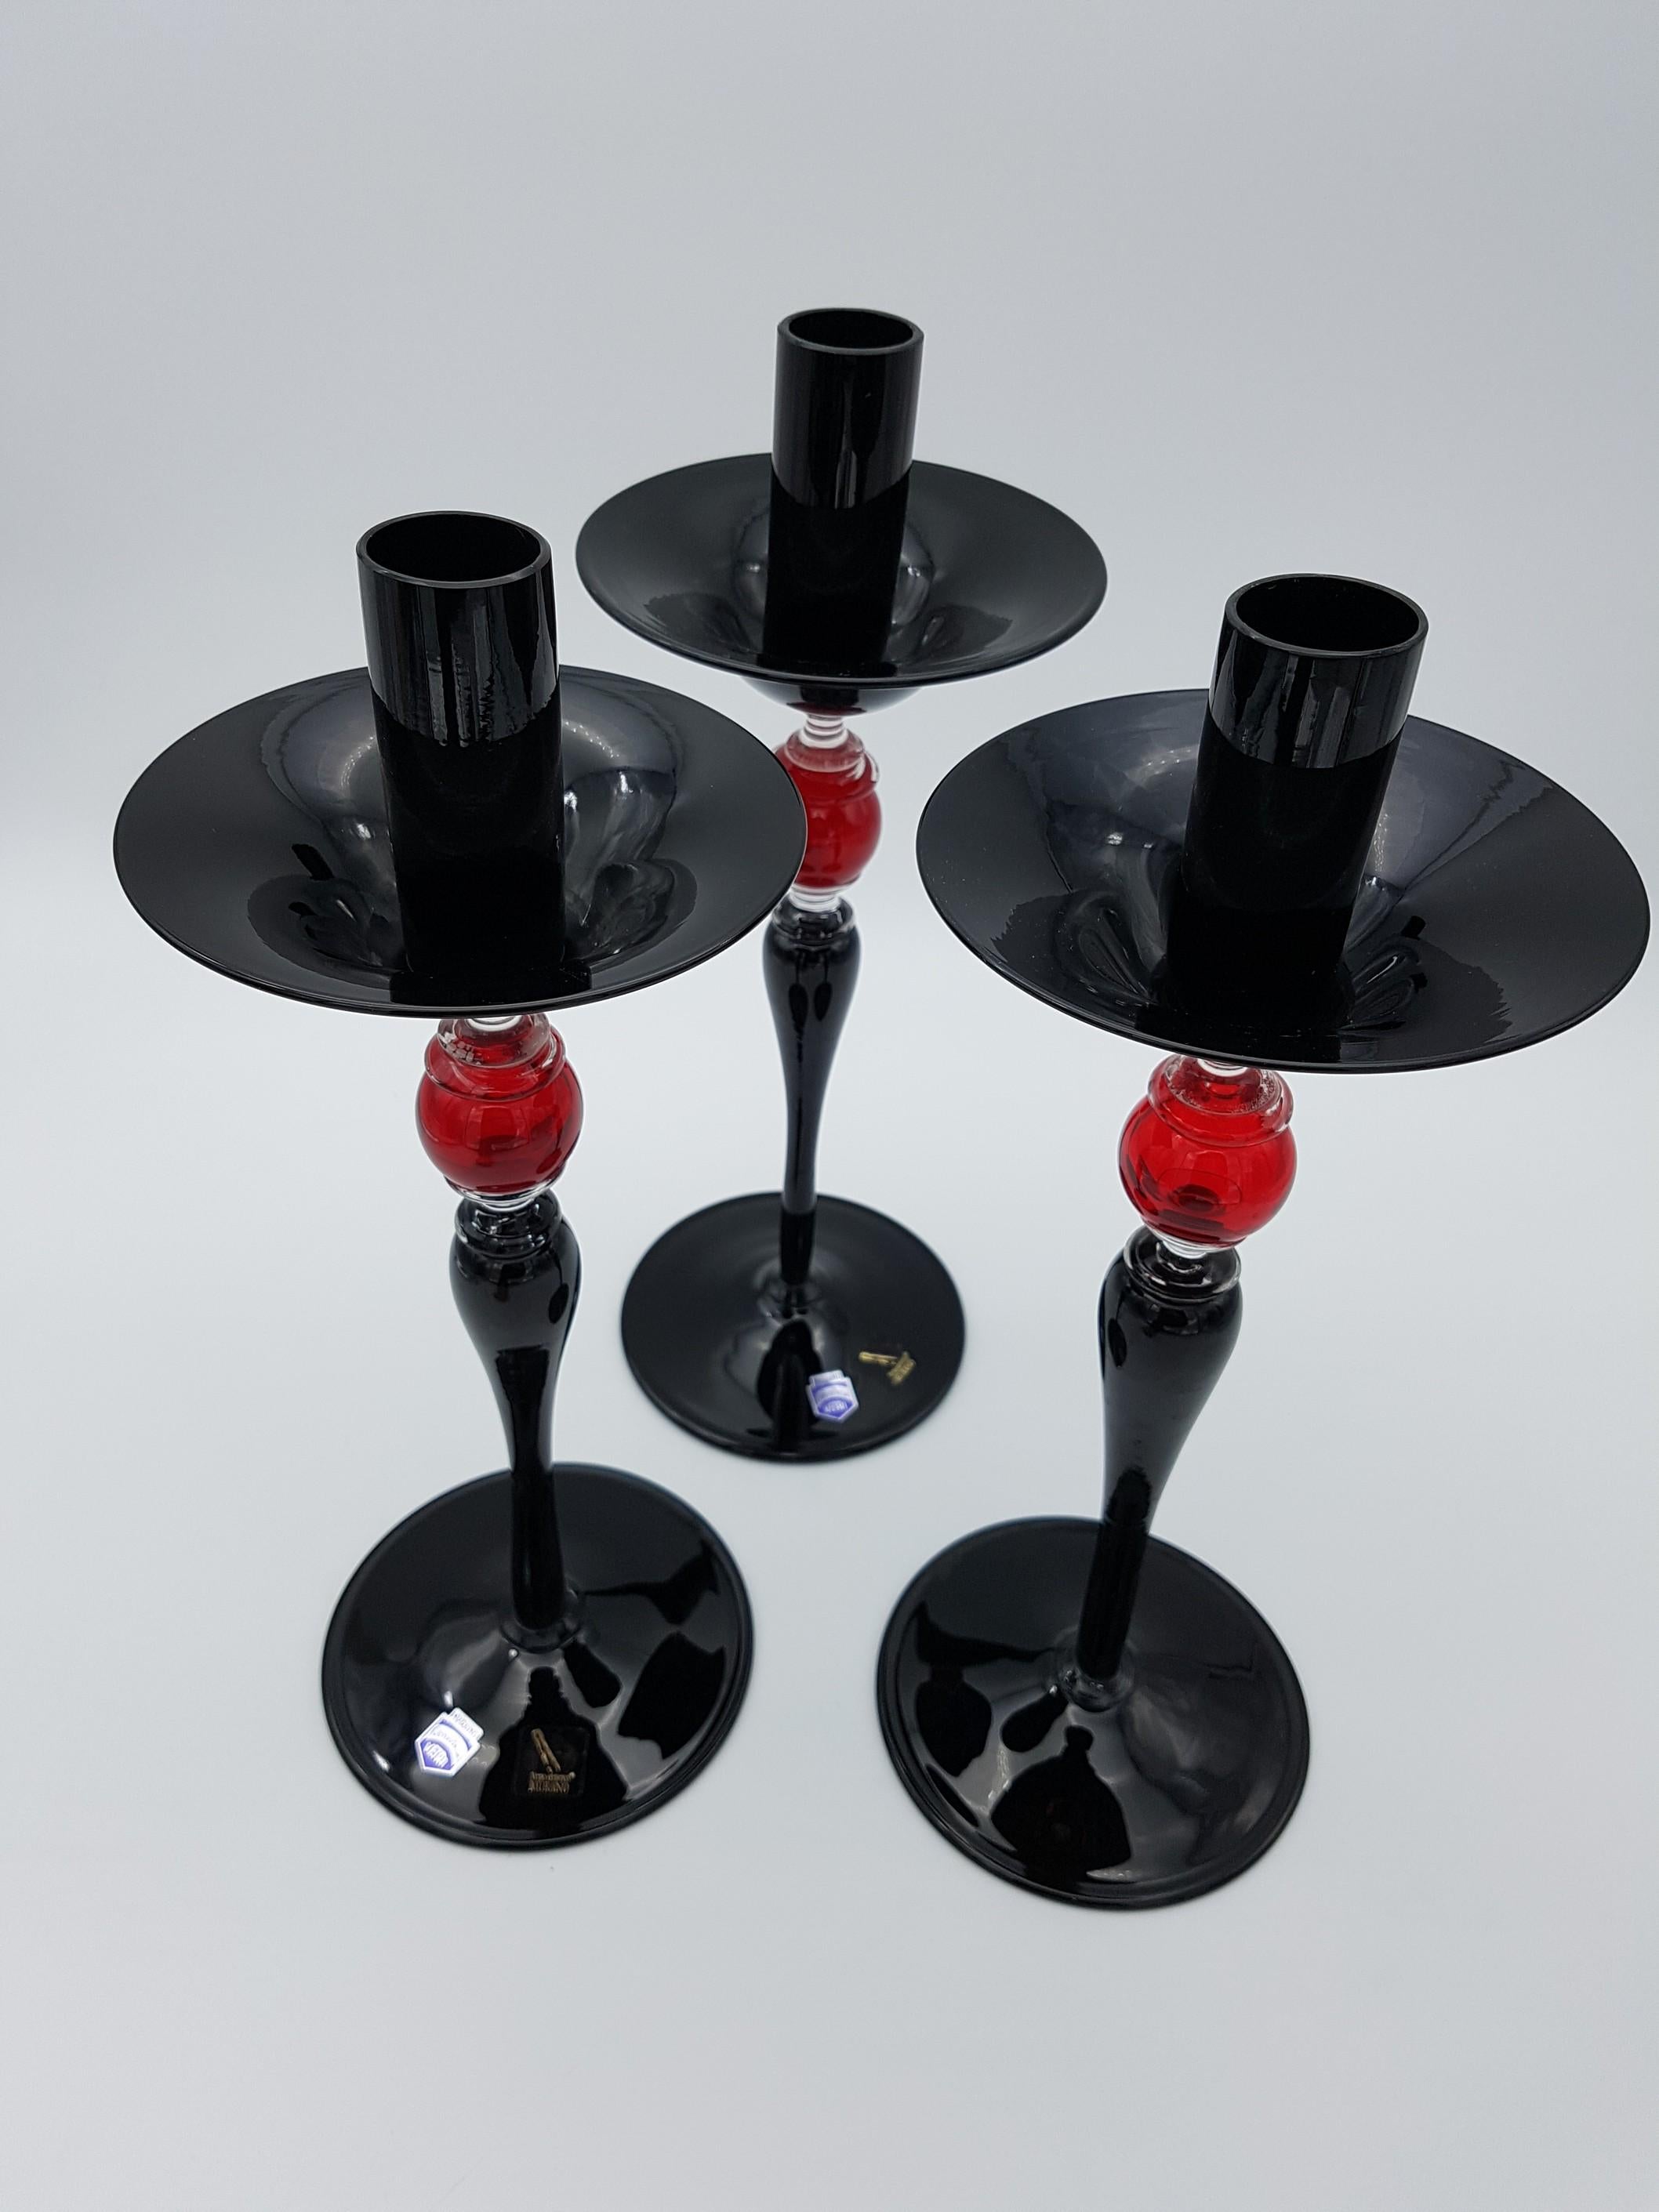 Modern Classic Murano Glass Candlesticks, Black and Red Color by Cenedese, 2007 For Sale 3